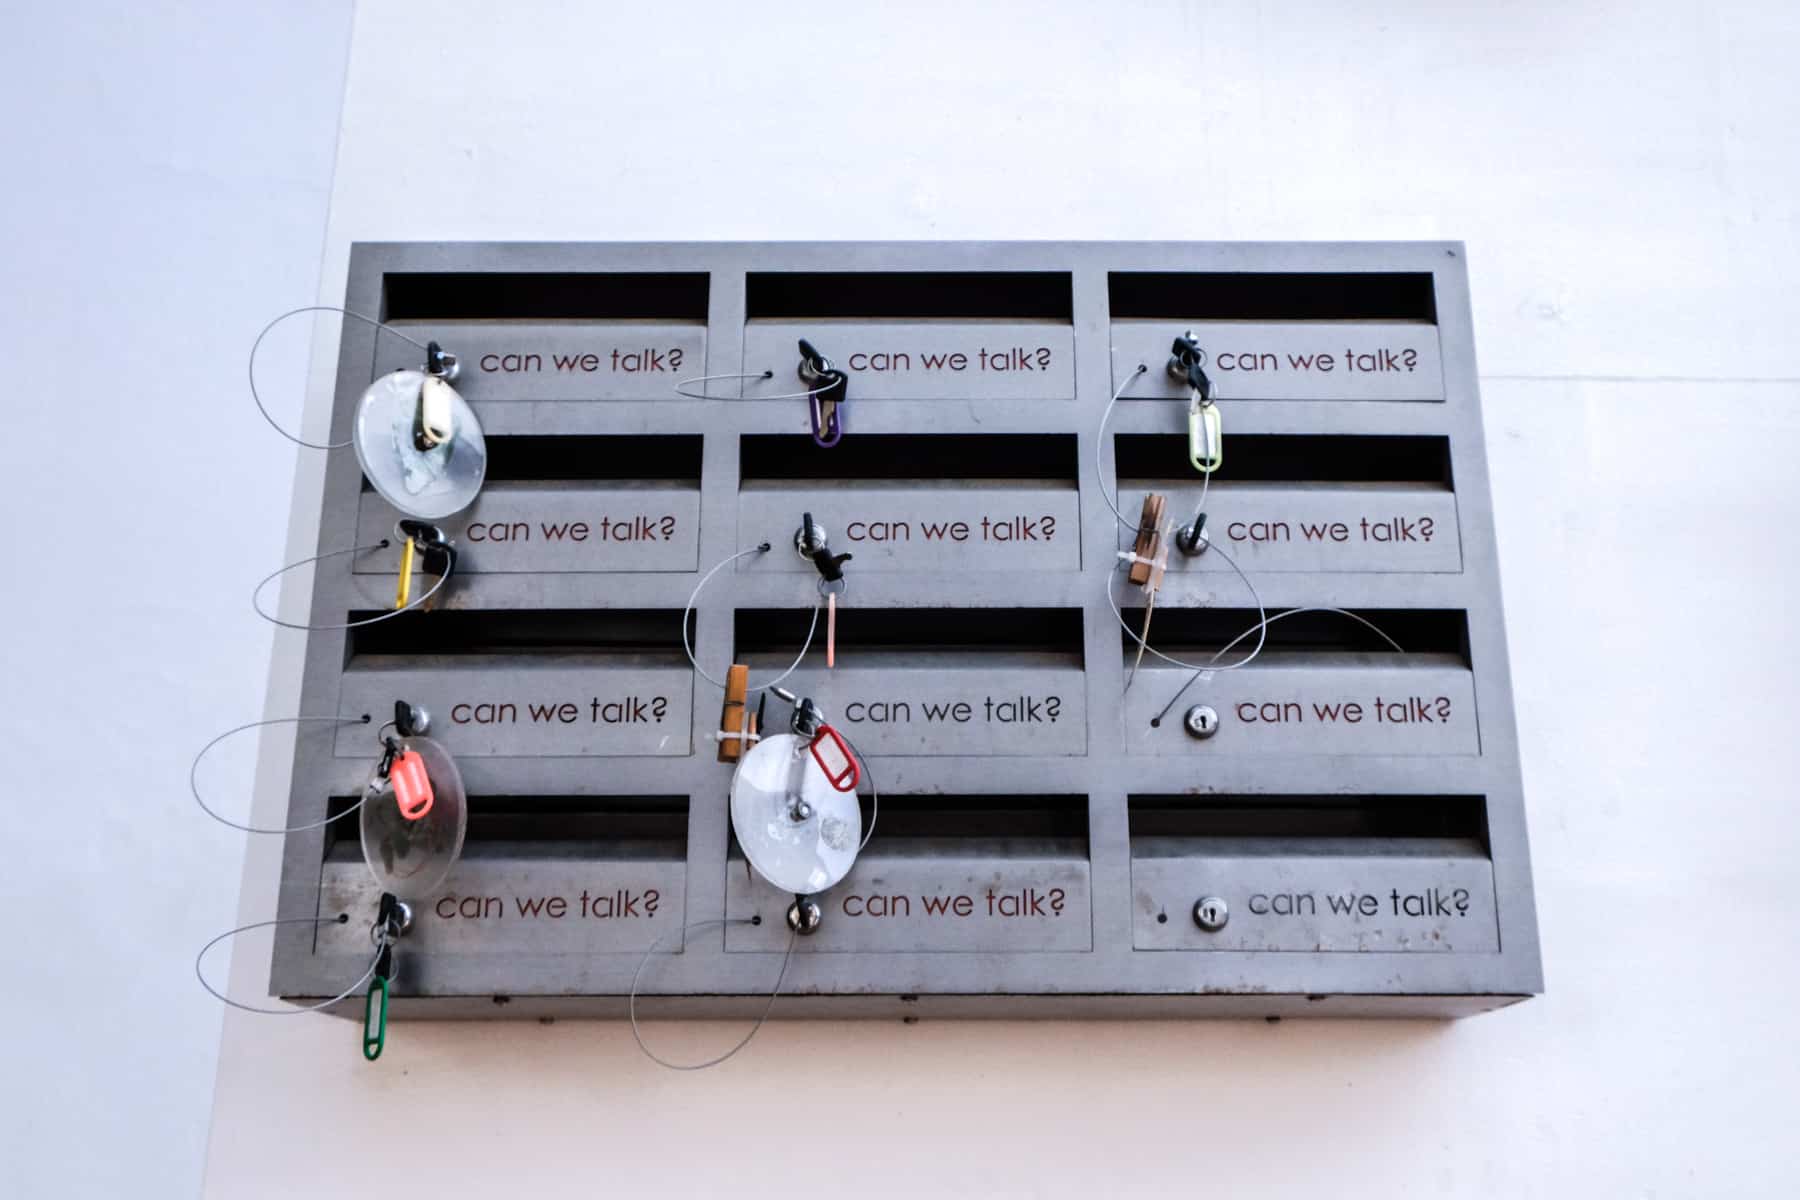 A box with 12 key boxes and keys, each with the text "Can we talk?" - one of the modern art displays in Stellenbosch, South Africa